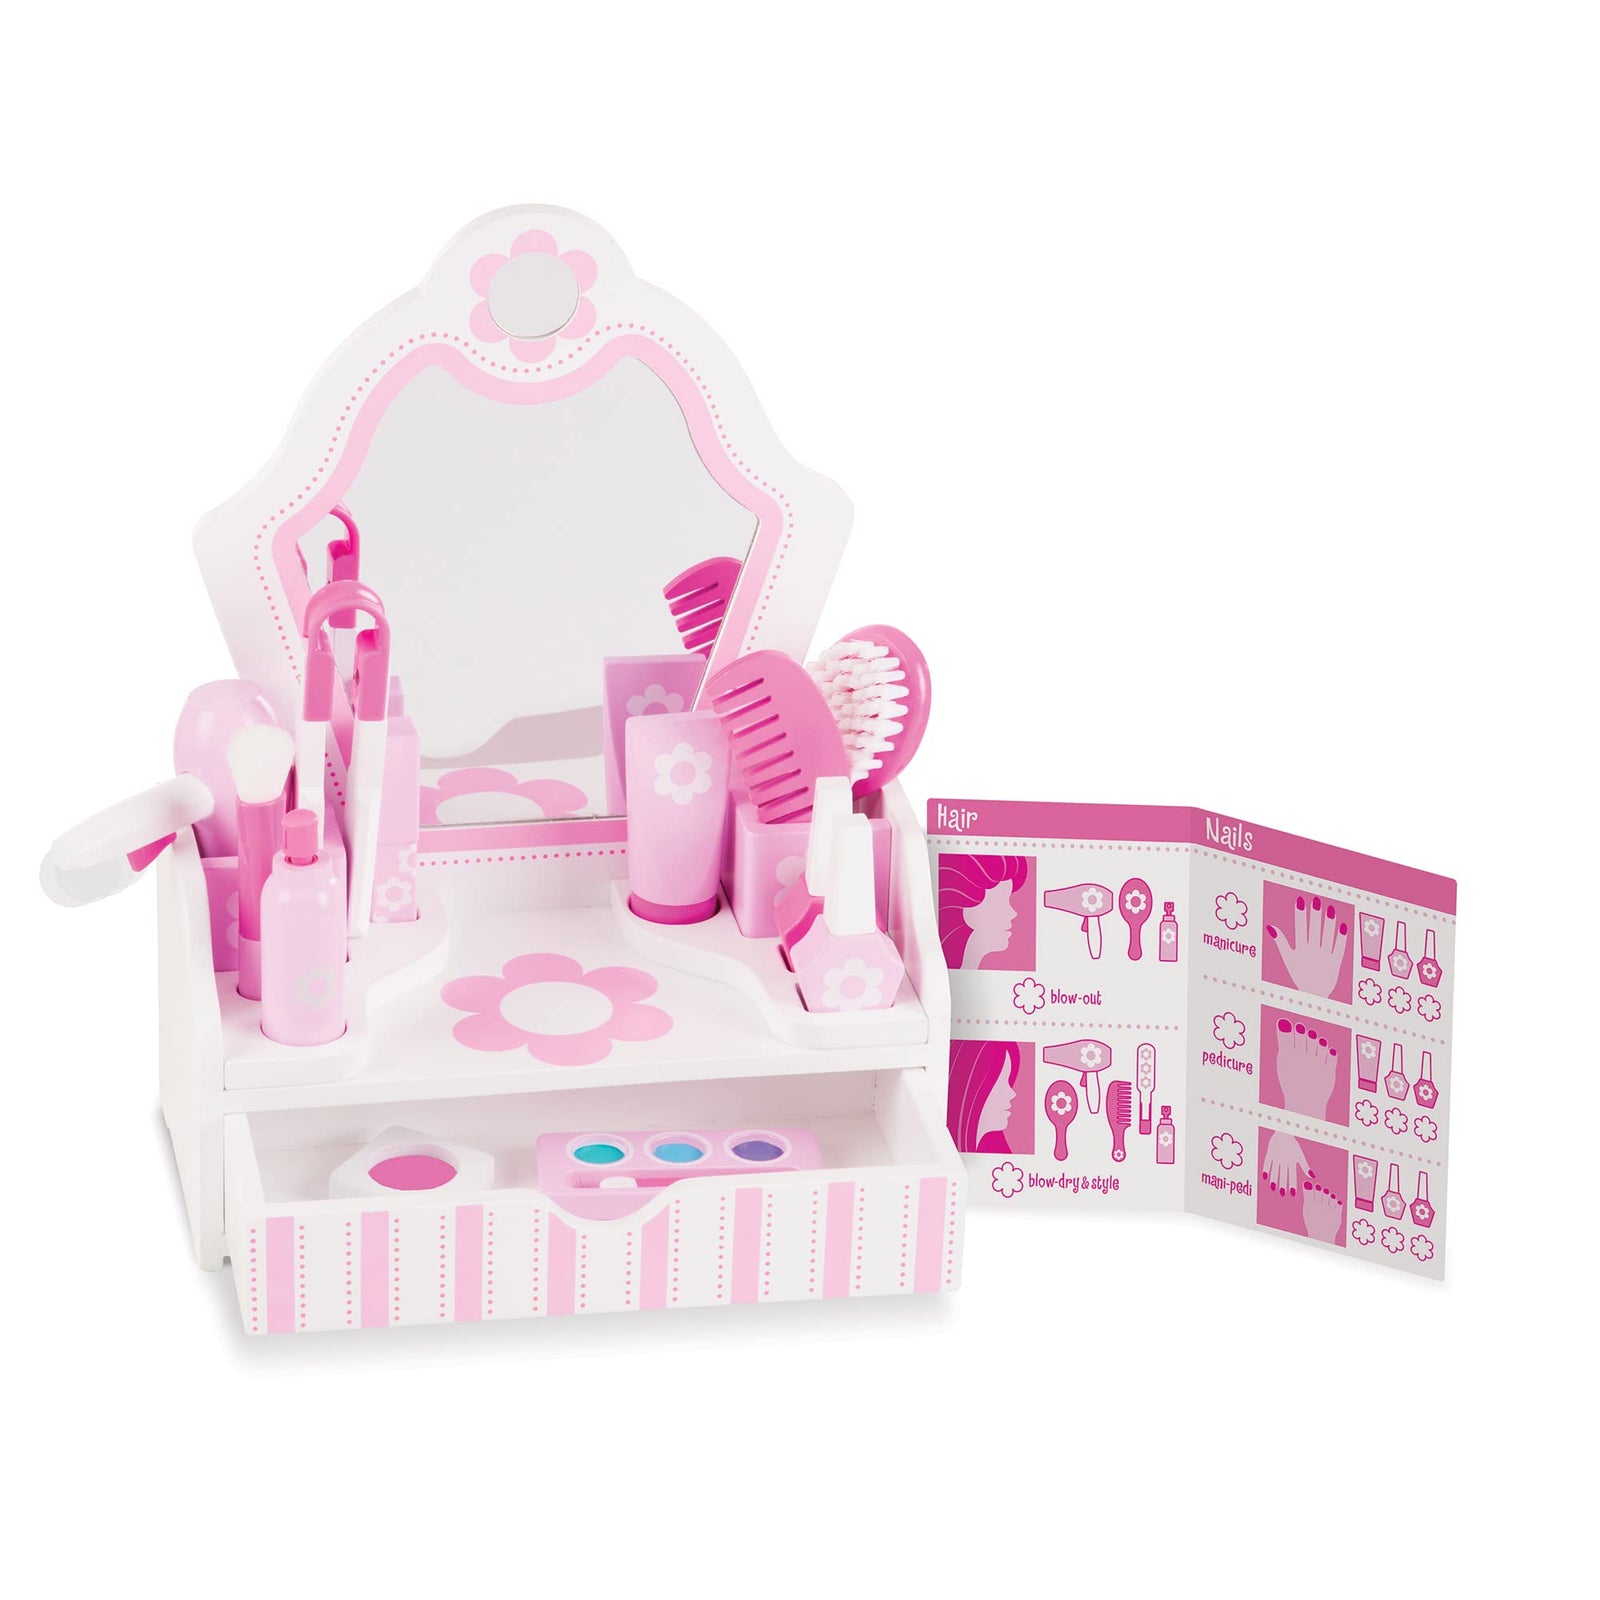 Melissa & Doug Wooden Beauty Salon Play Set With Vanity and Accessories (18 pcs)